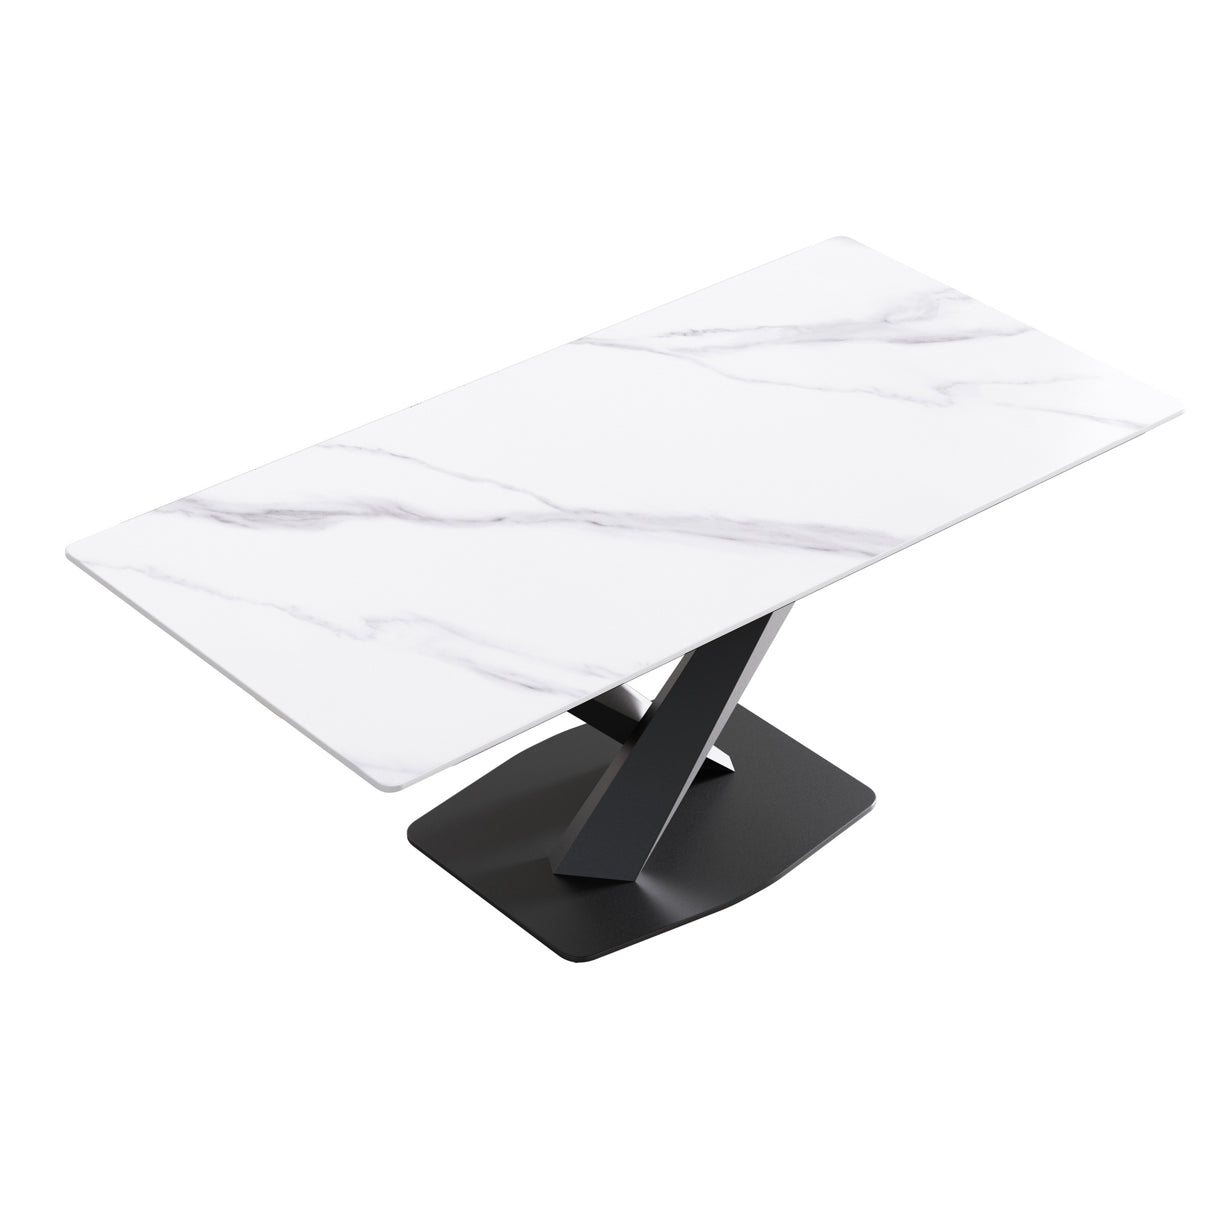 70.87" modern artificial stone white straight edge  black metal leg dining table-can accommodate 6-8 people - Home Elegance USA